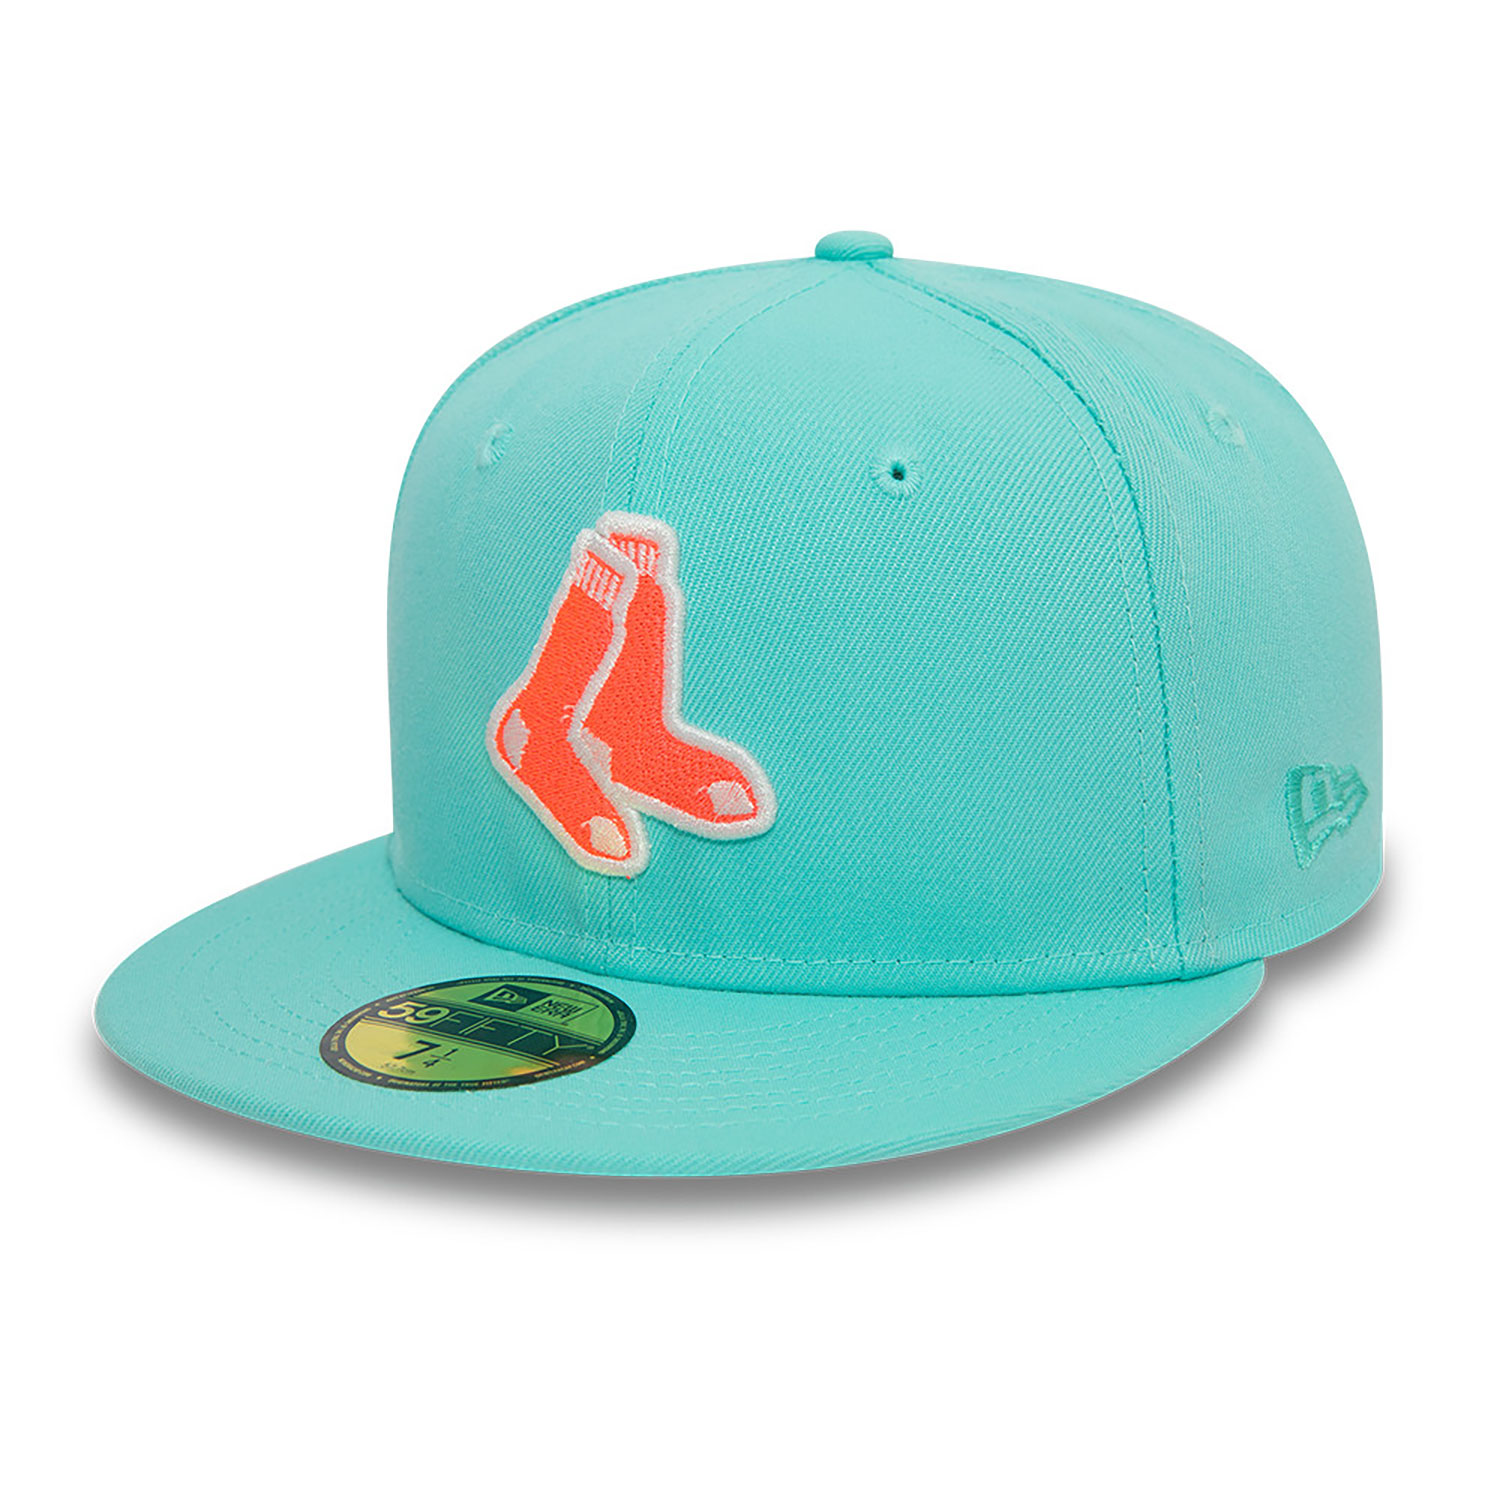 Boston Red Sox All Star Game Turquoise 59FIFTY Fitted Cap